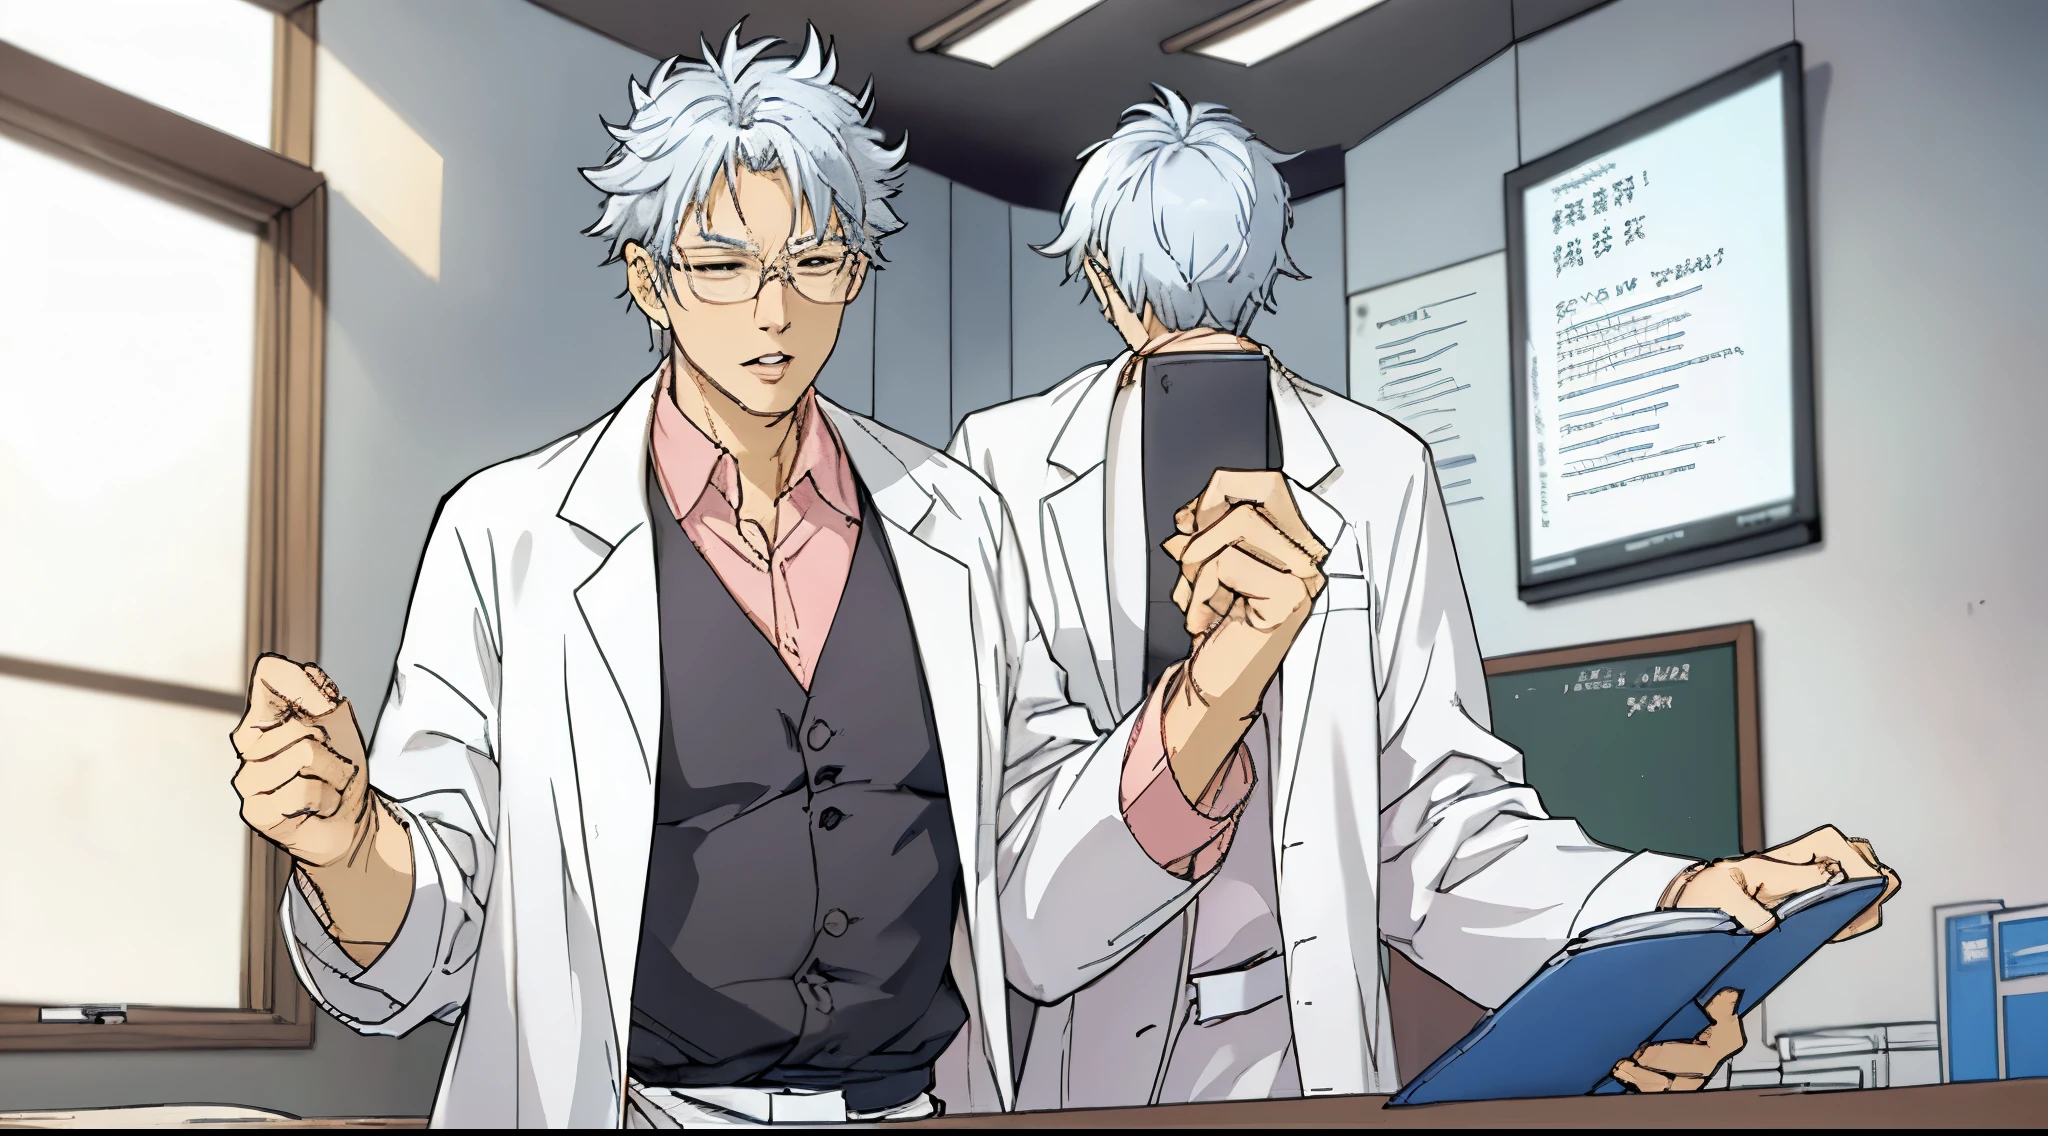 Silver haired teacher wearing lab coat and medical glasses, he is talking and moving his lips